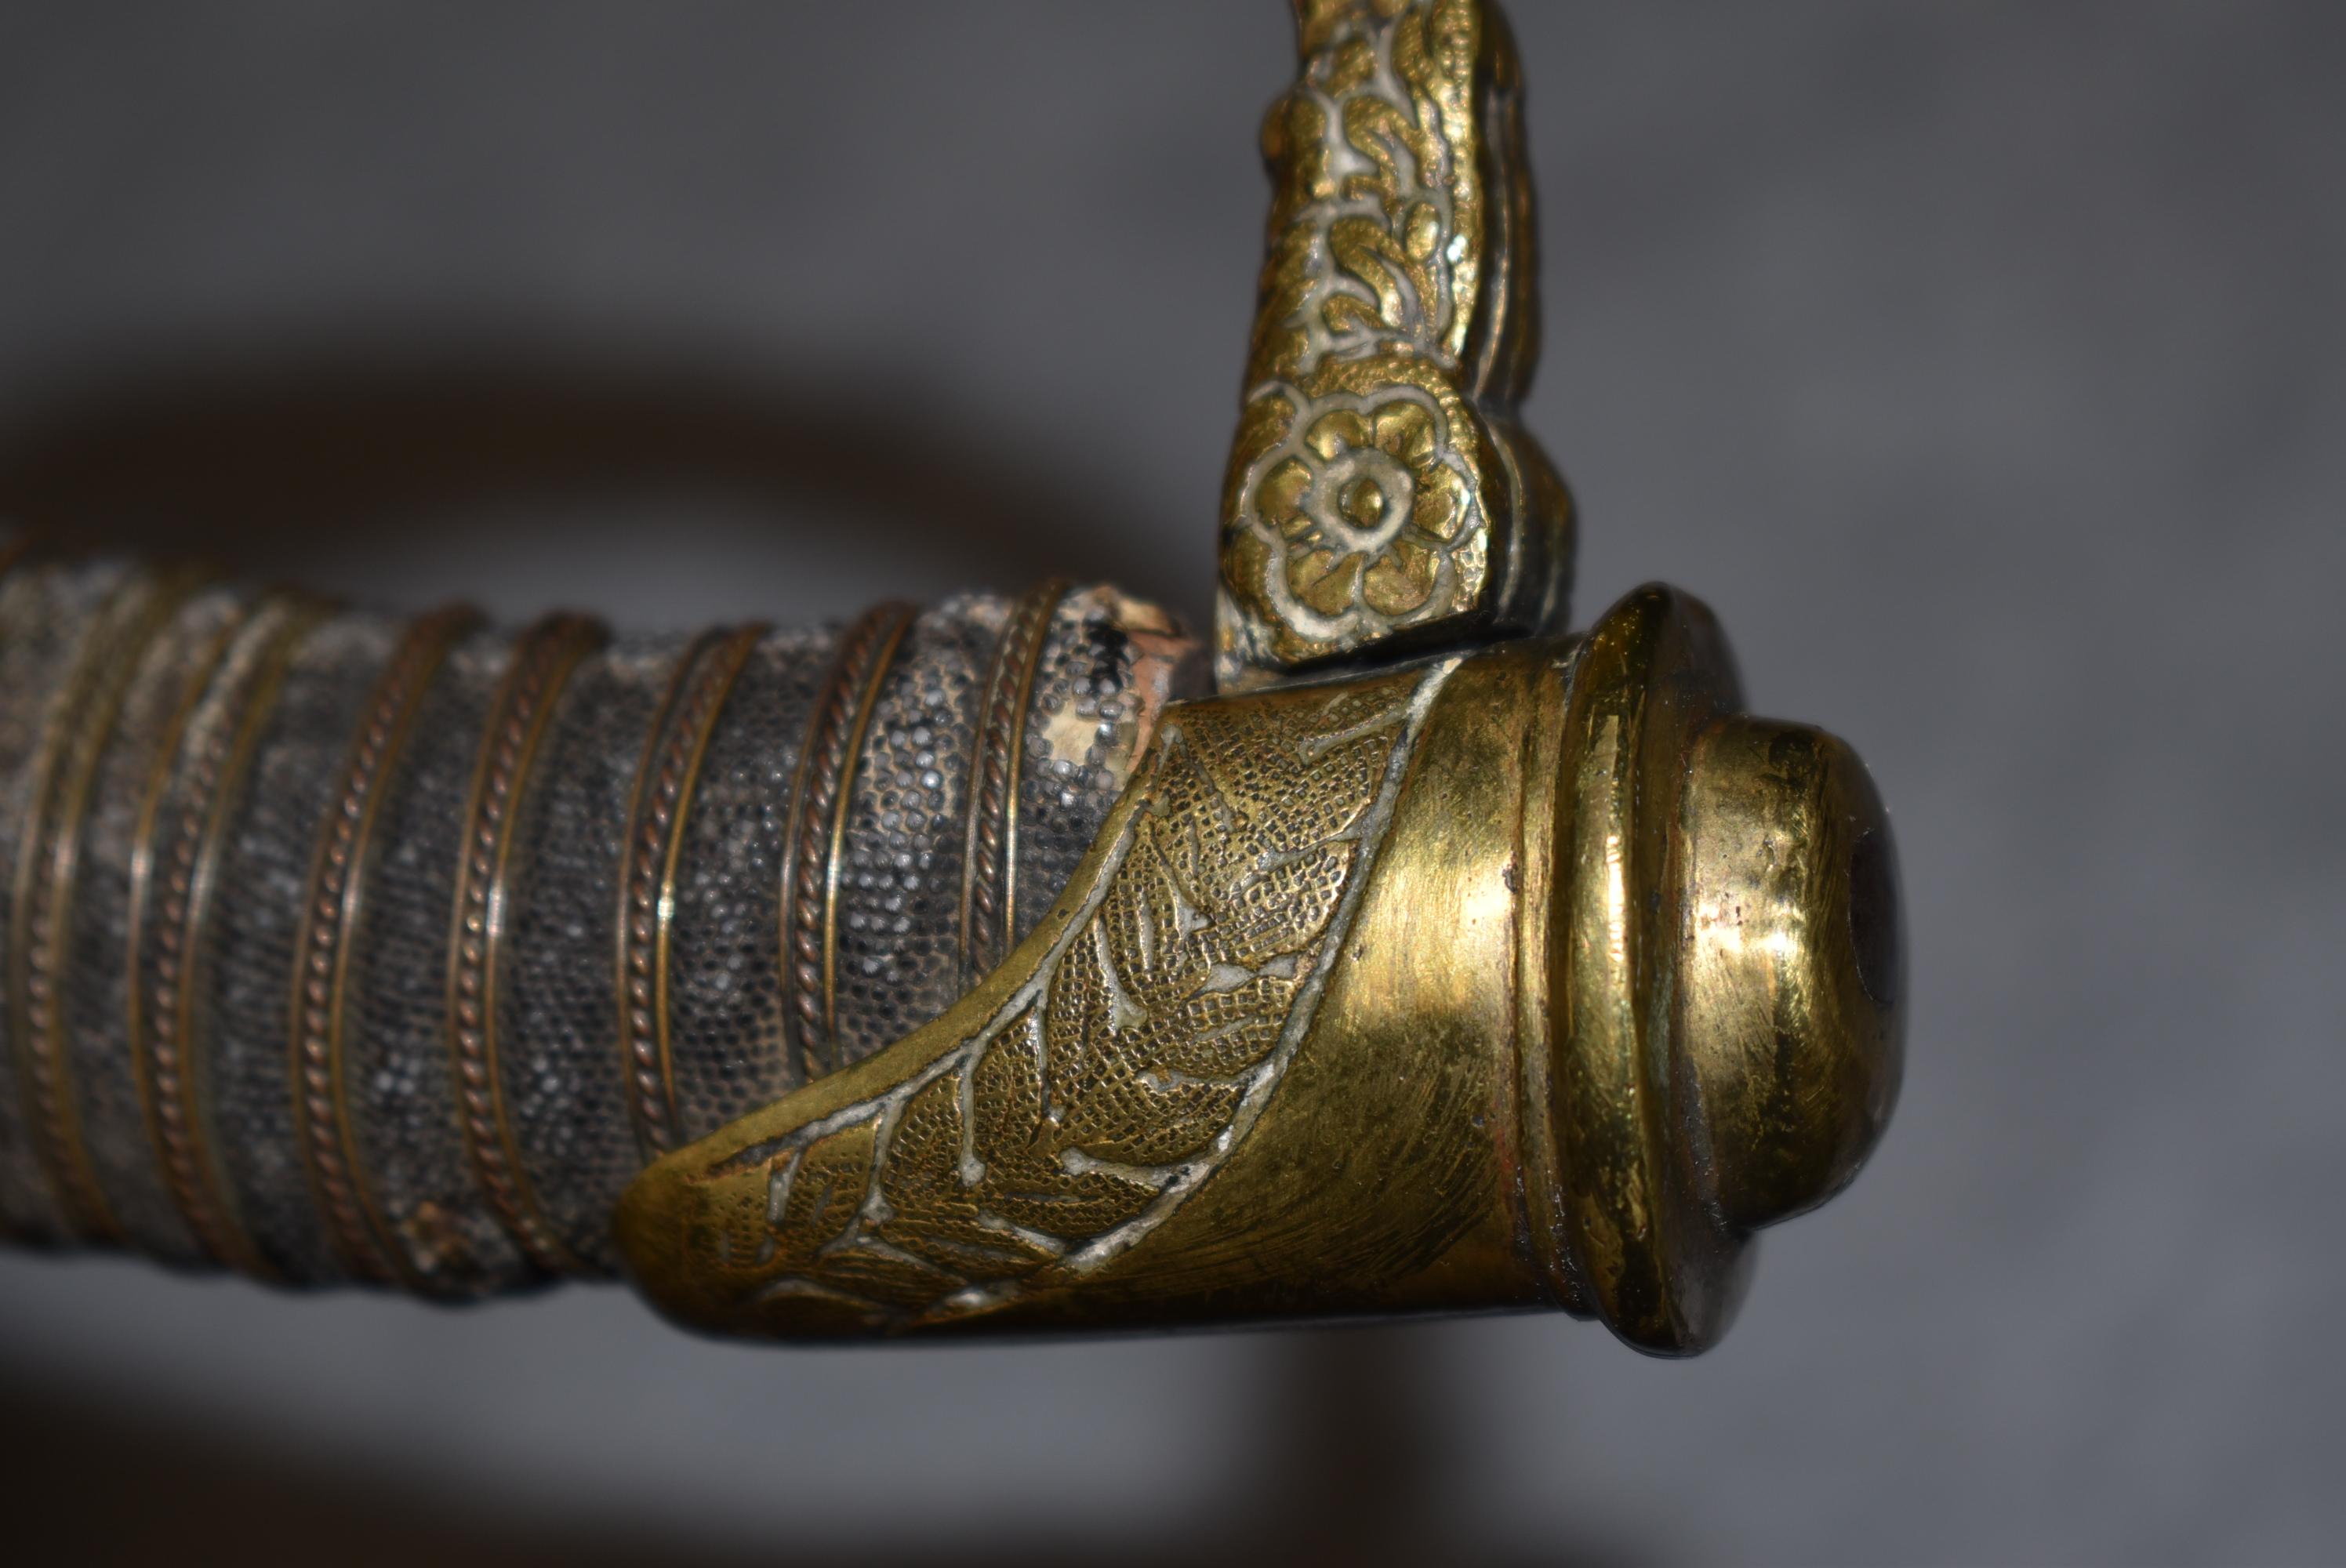 M1840 cavalry officer’s saber and scabbard